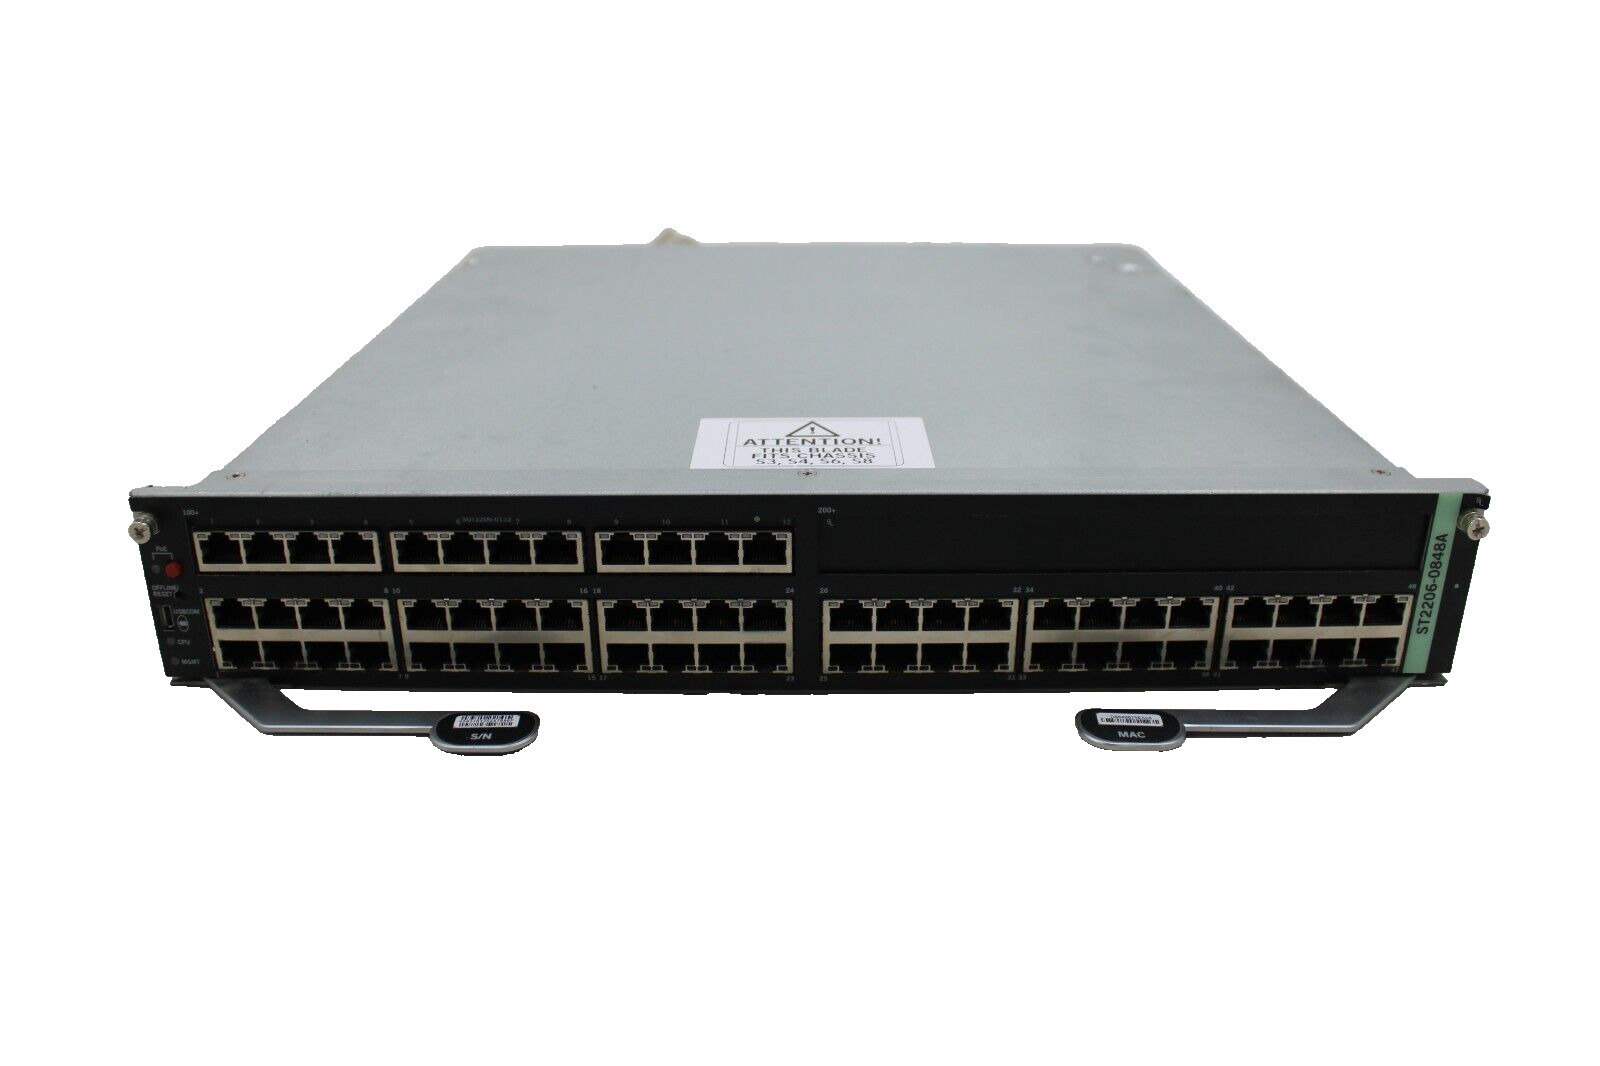 Enterasys/Extreme Networks ST2206-0848A 48-Port w/ 12PORT EXP Module TESTED